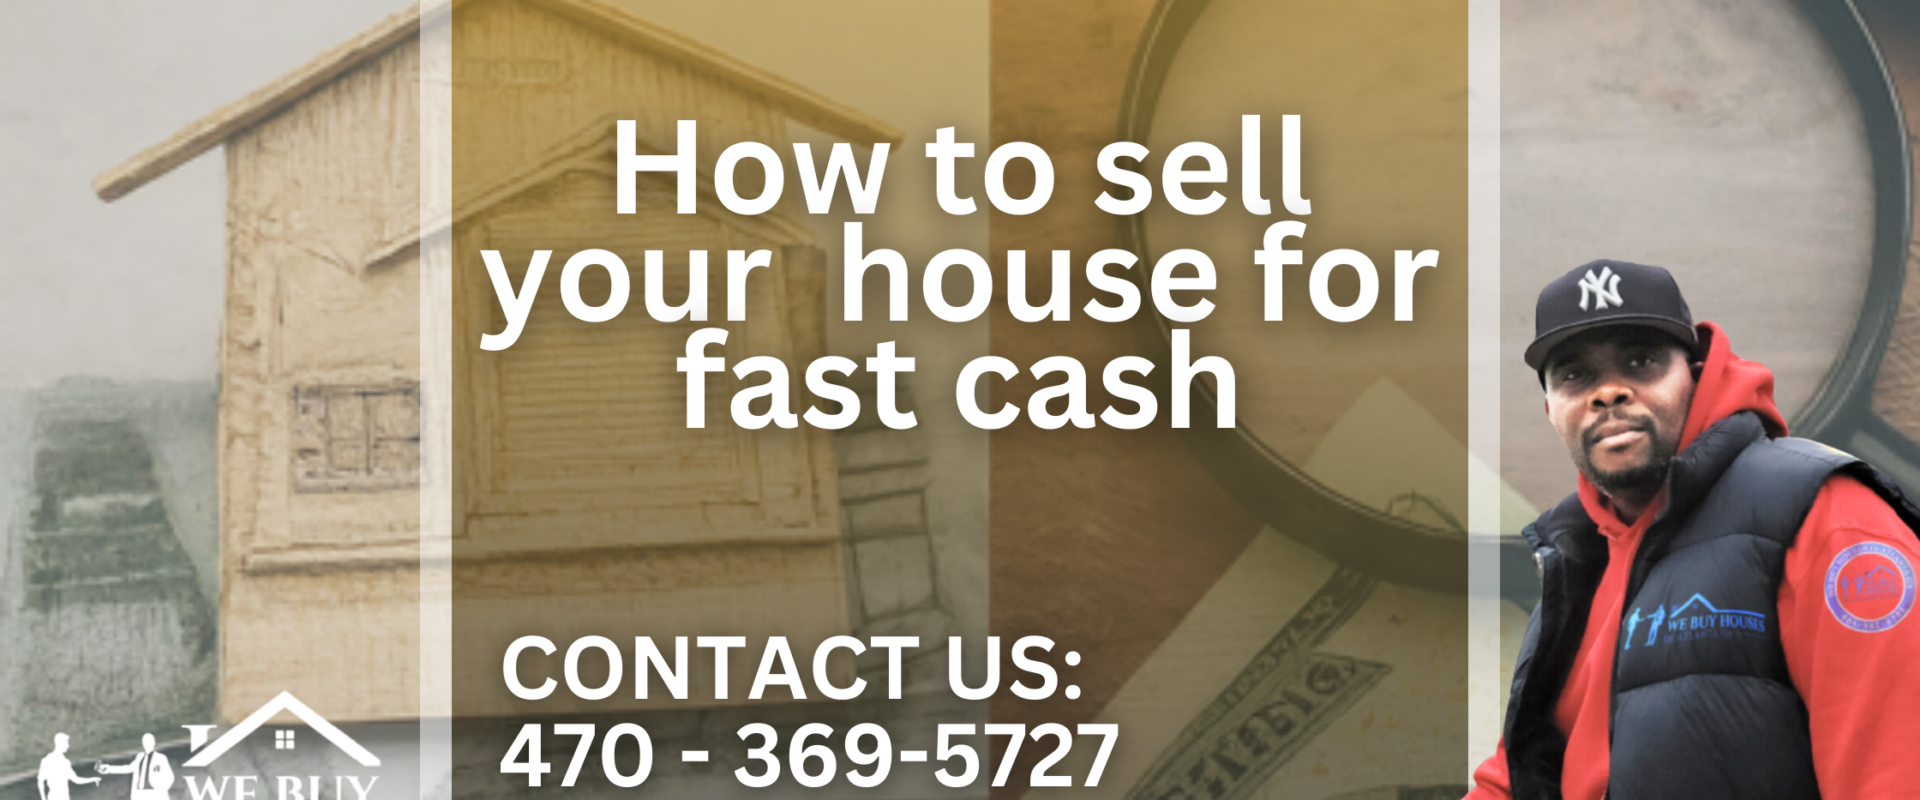 How-to-sell-your-house-for-fast-cash